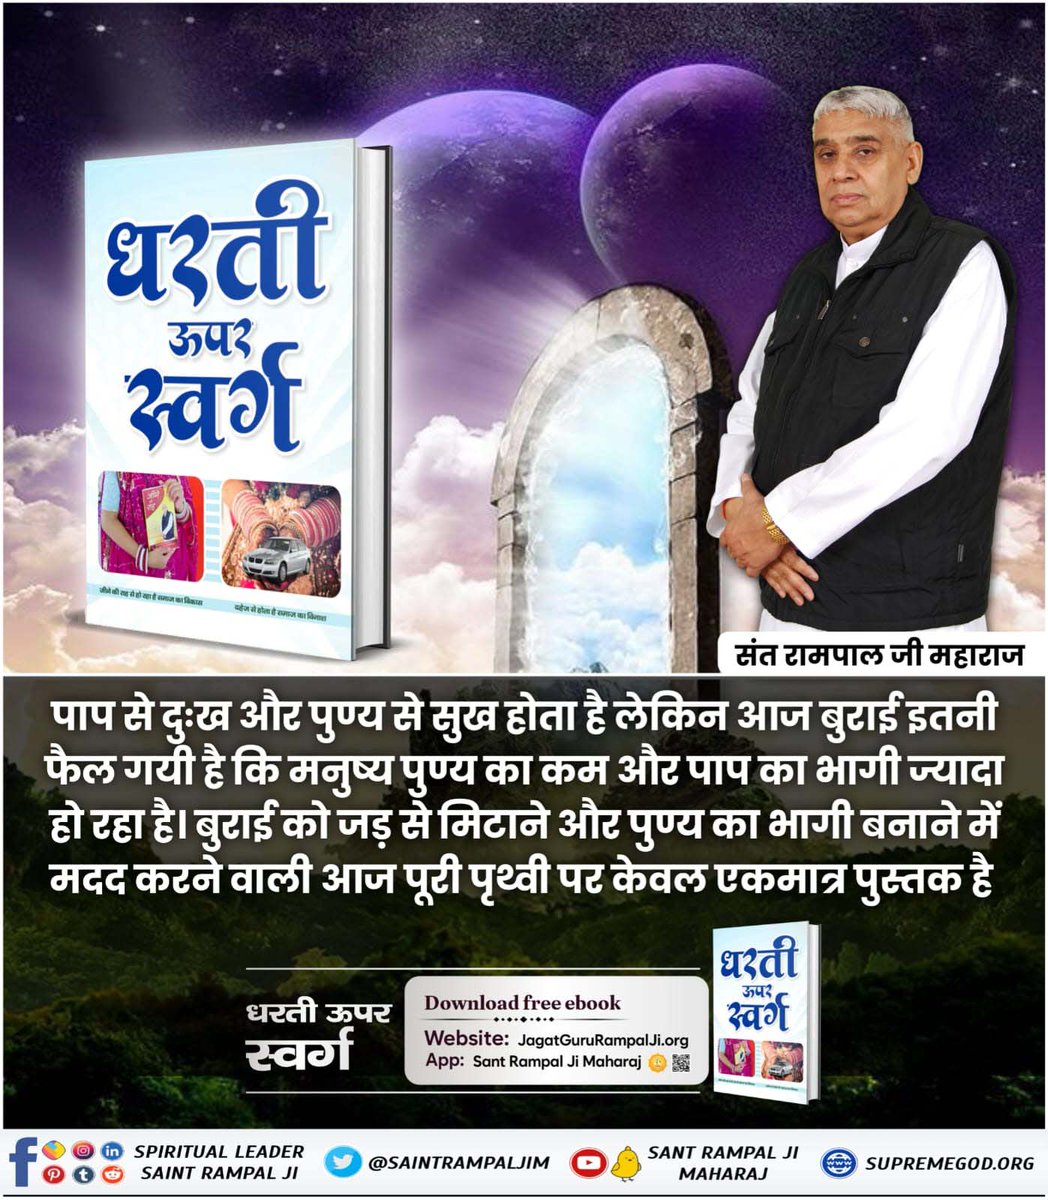 #धरती_को_स्वर्ग_बनाना_है
Listen to the Satsang of Sant Rampal Ji Maharaj and join him for free so that you too are happy like us. After joining him, all types of diseases of the body will be destroyed. All types of addictions will be left.
#GodNightMonday